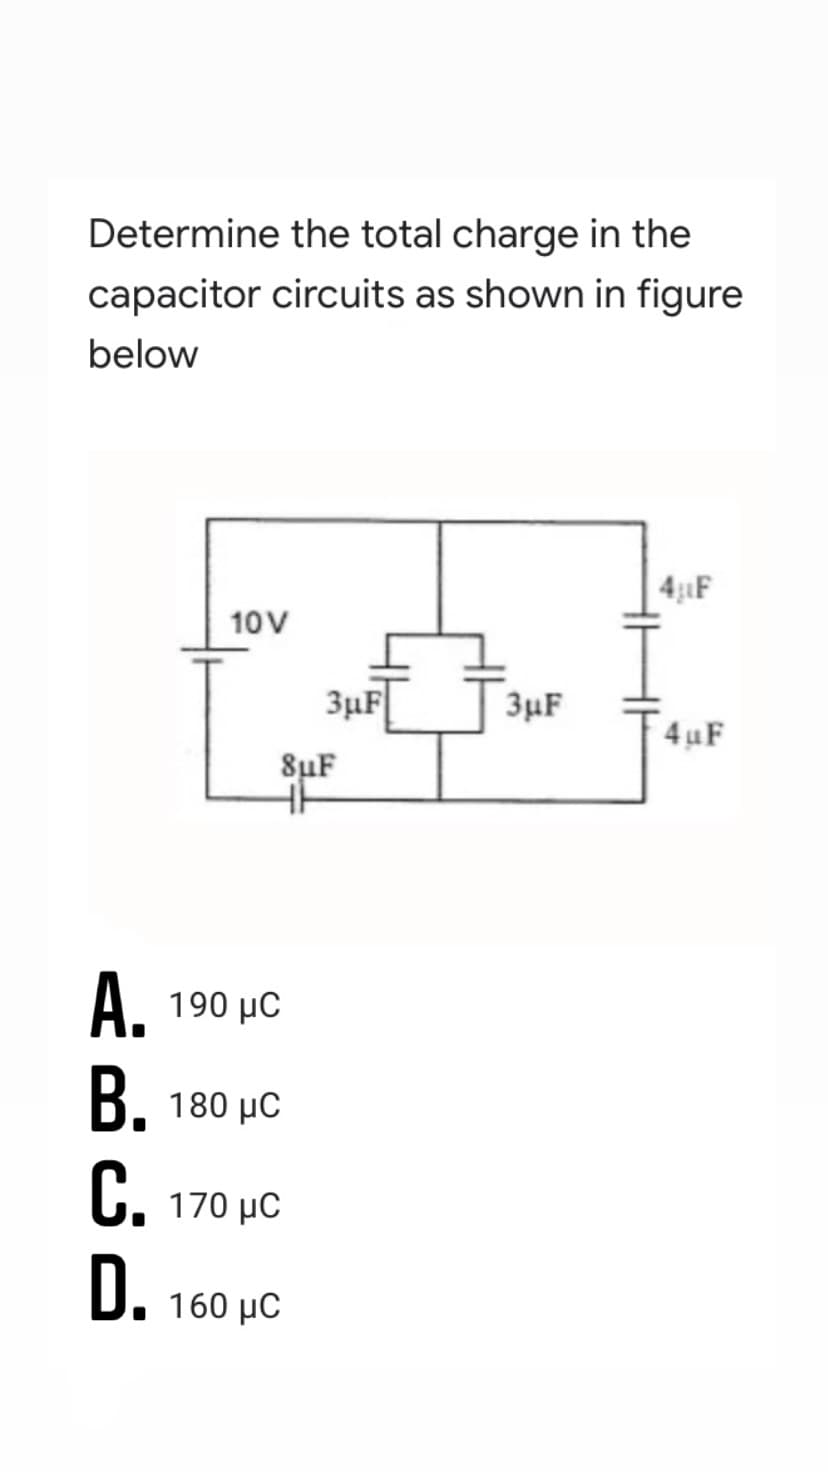 Determine the total charge in the
capacitor circuits as shown in figure
below
4:LF
10V
3µF[
3µF
4uF
8µF
A. 190 µC
B. 180 µC
C. 170 µC
D.
160 μC
